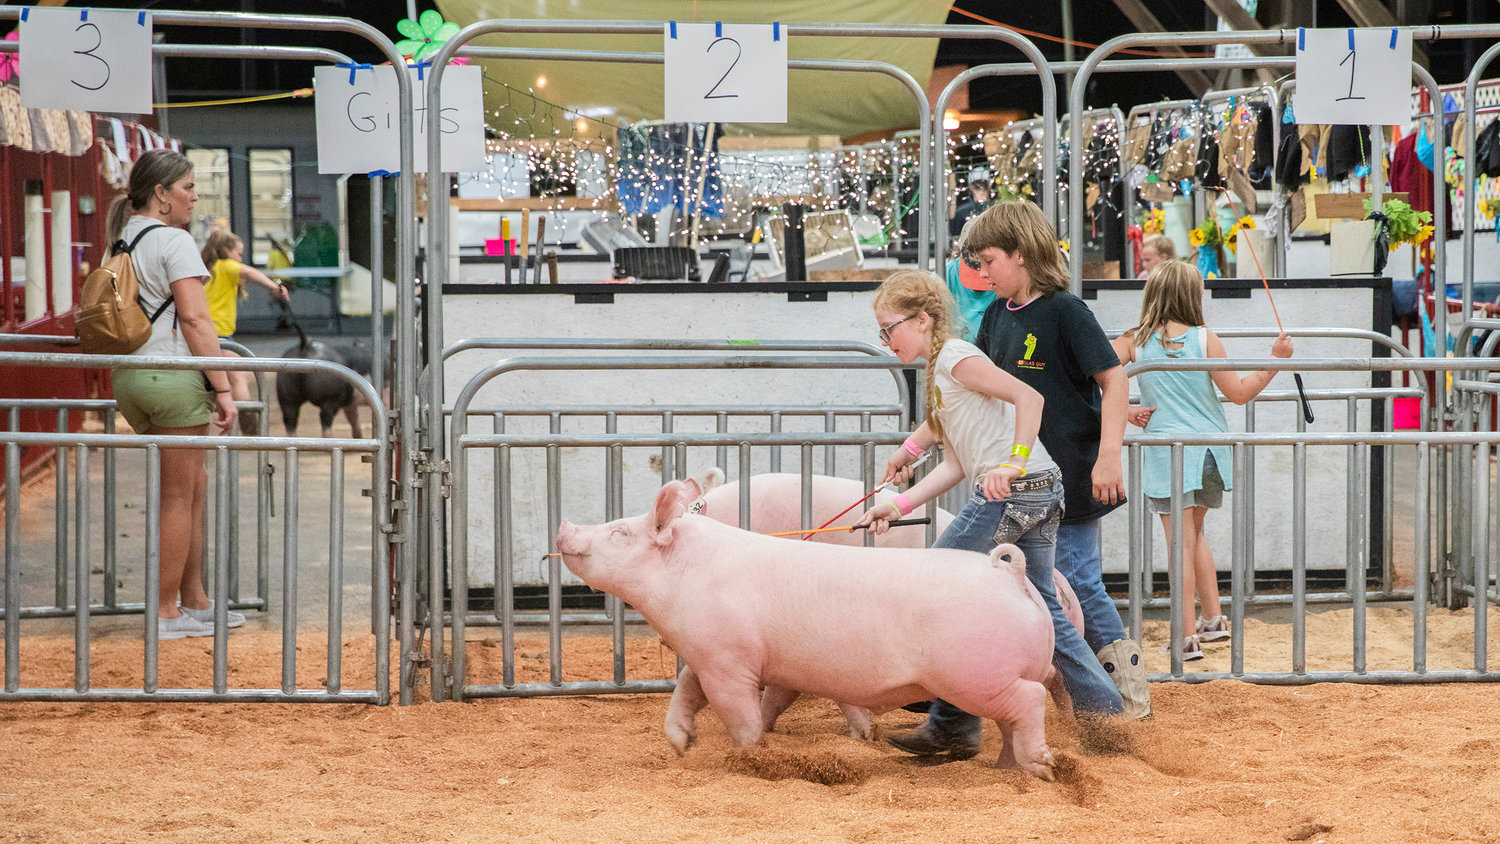 Elizabeth South, 9, walks with Bacon, a Yorkshire-mix, alongside her brother Dalton, 12, and a pig named Trouble, Tuesday night at the Southwest Washington Fairgrounds in Centralia.